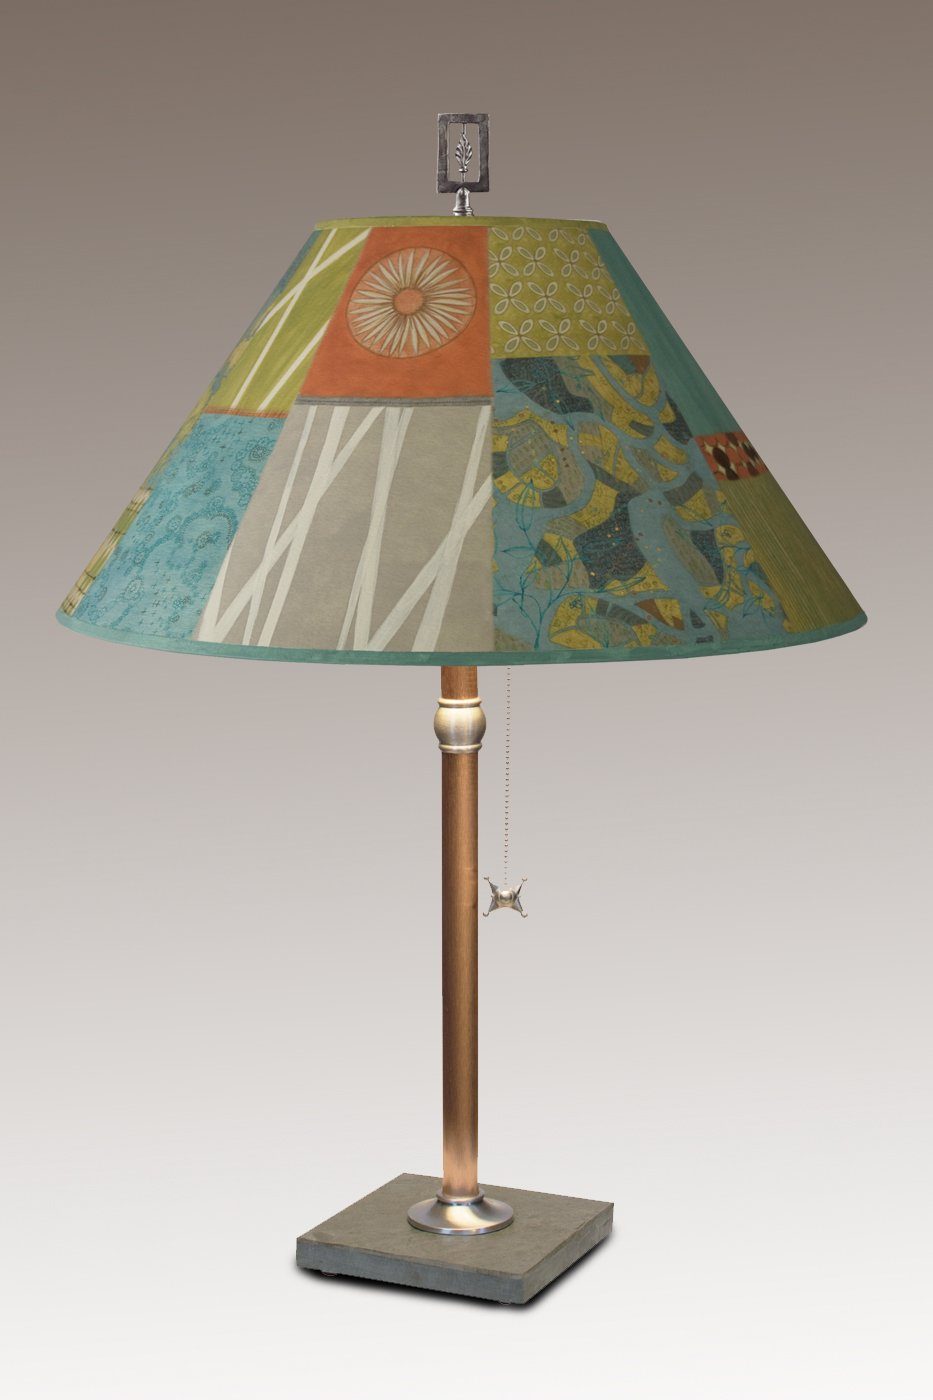 Janna Ugone & Co Table Lamps Copper Table Lamp with Large Conical Shade in Zest